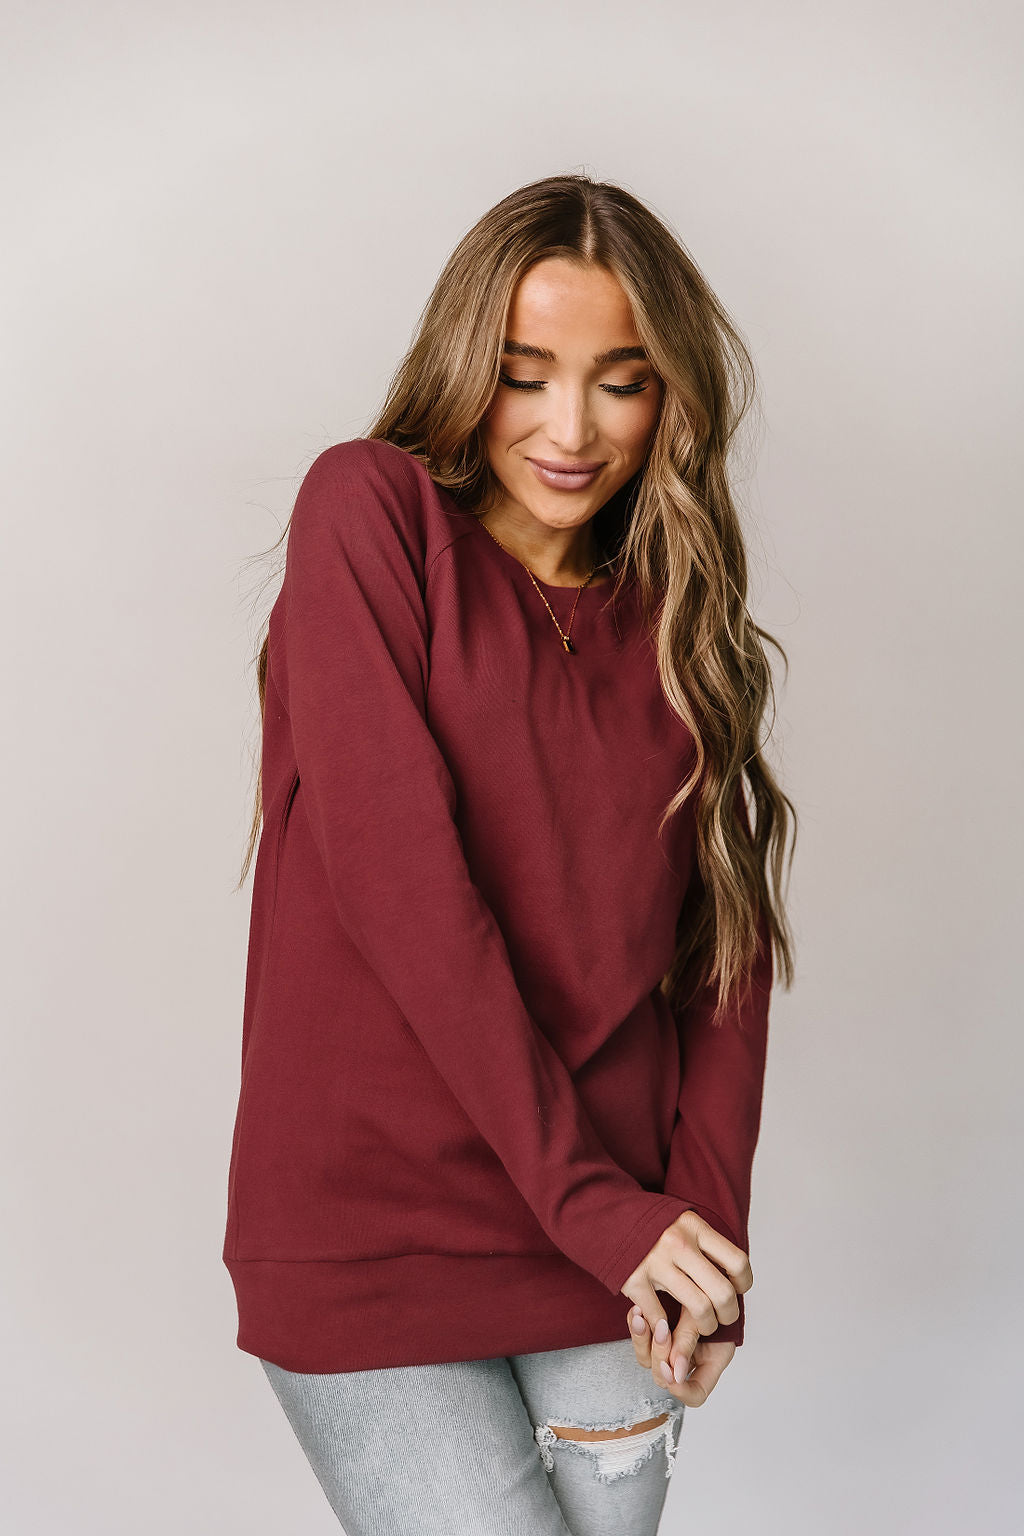 Ampersand classic pullover- cranberry